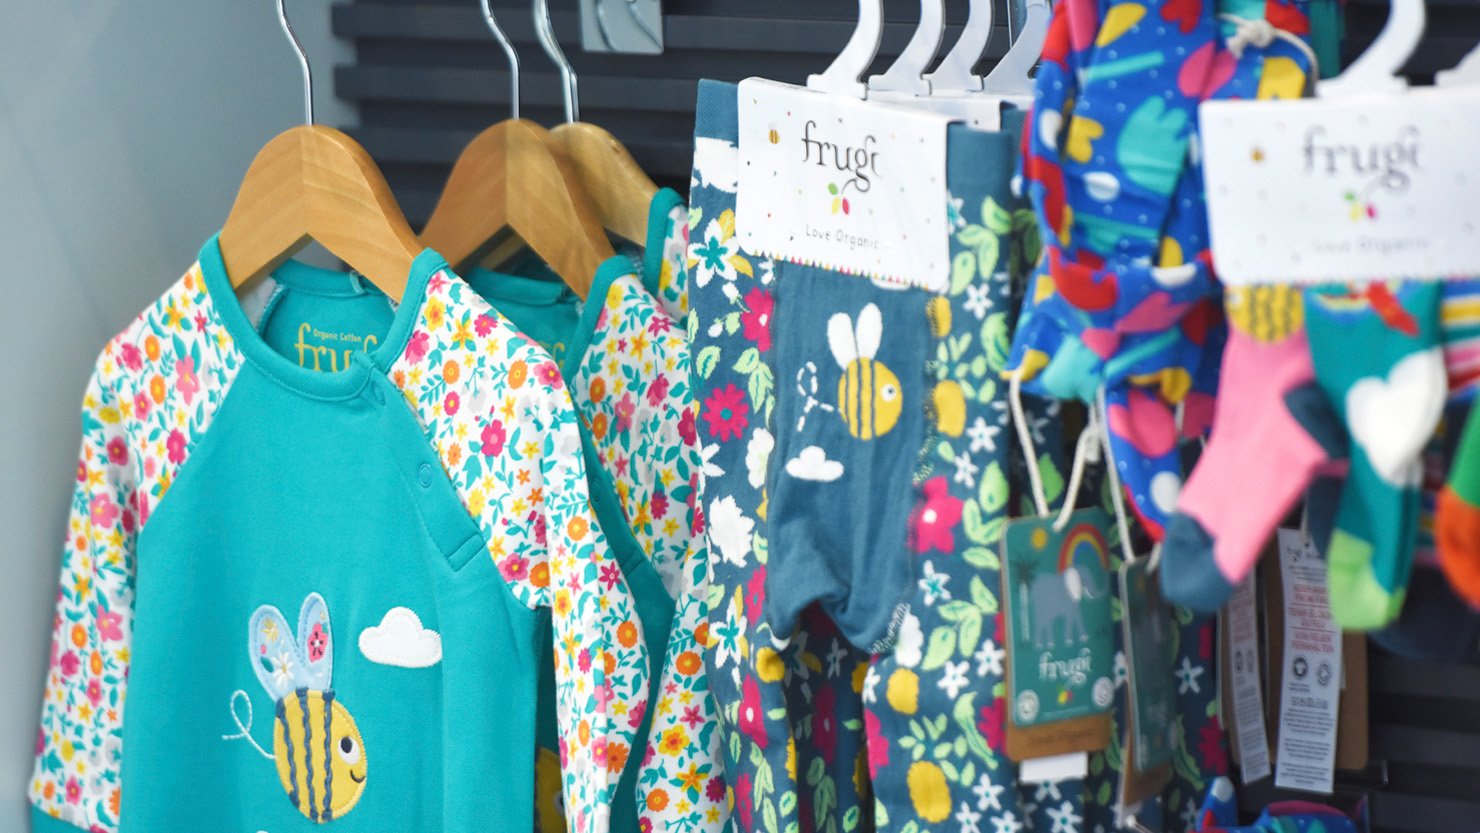 Frugi products on display in the shop at The Box, Plymouth